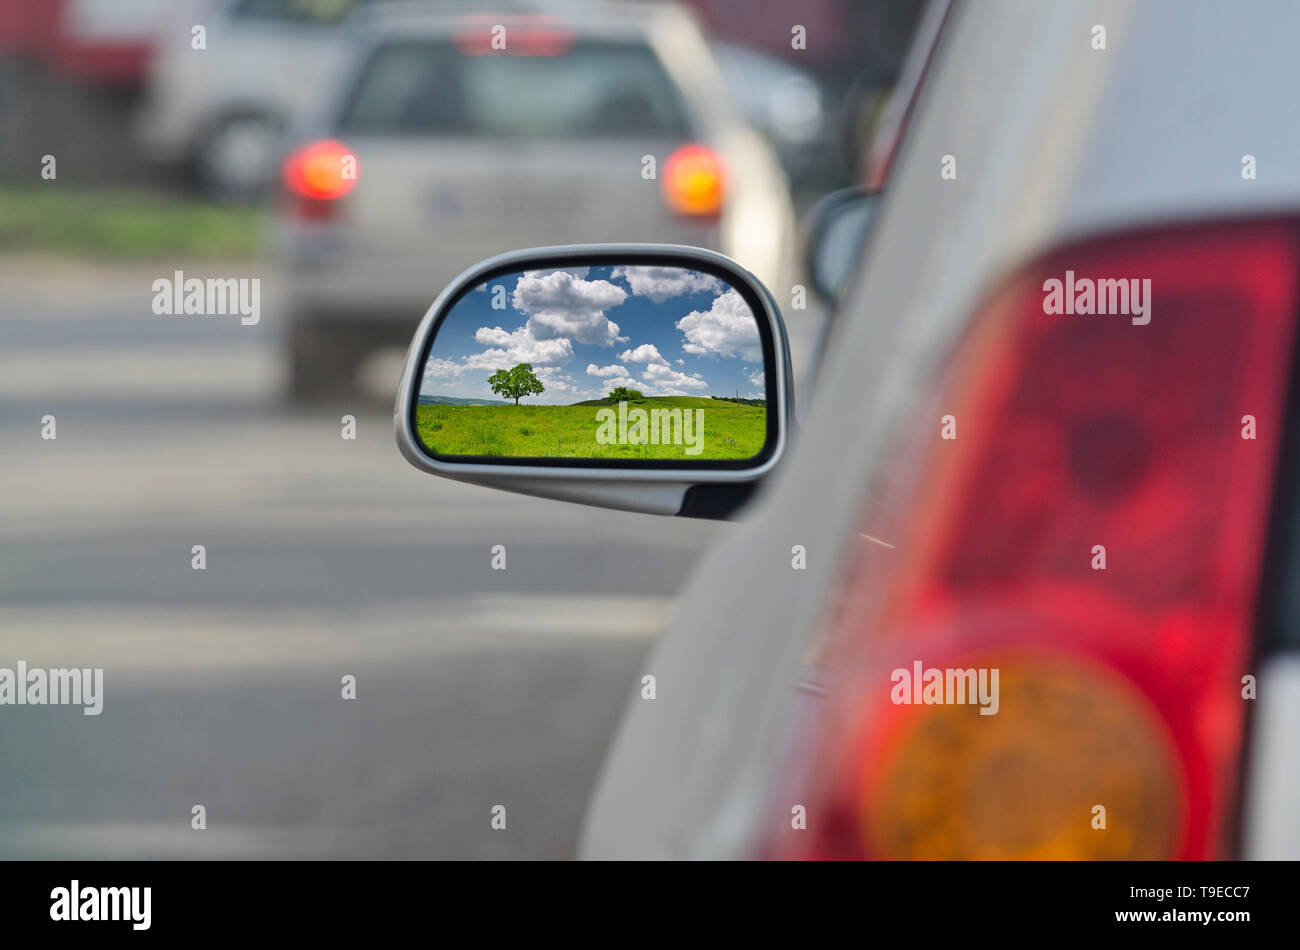 Looking in the side rear-view mirror during the traffic jam Stock Photo